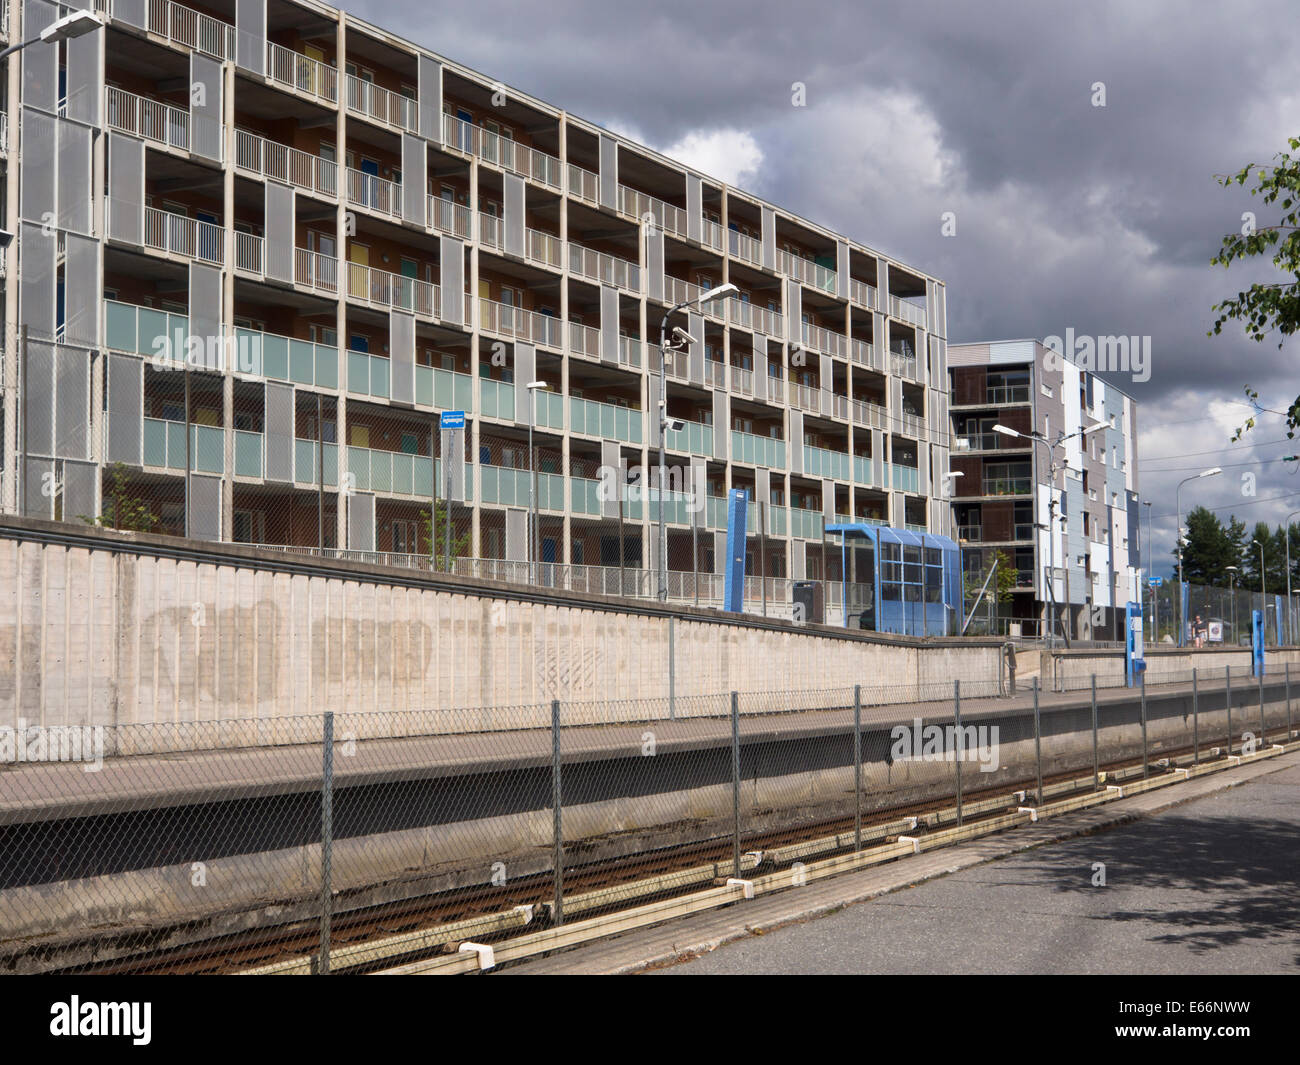 Living close to public transport , new apartment buildings at Skullerud metro station, Oslo Norway Stock Photo